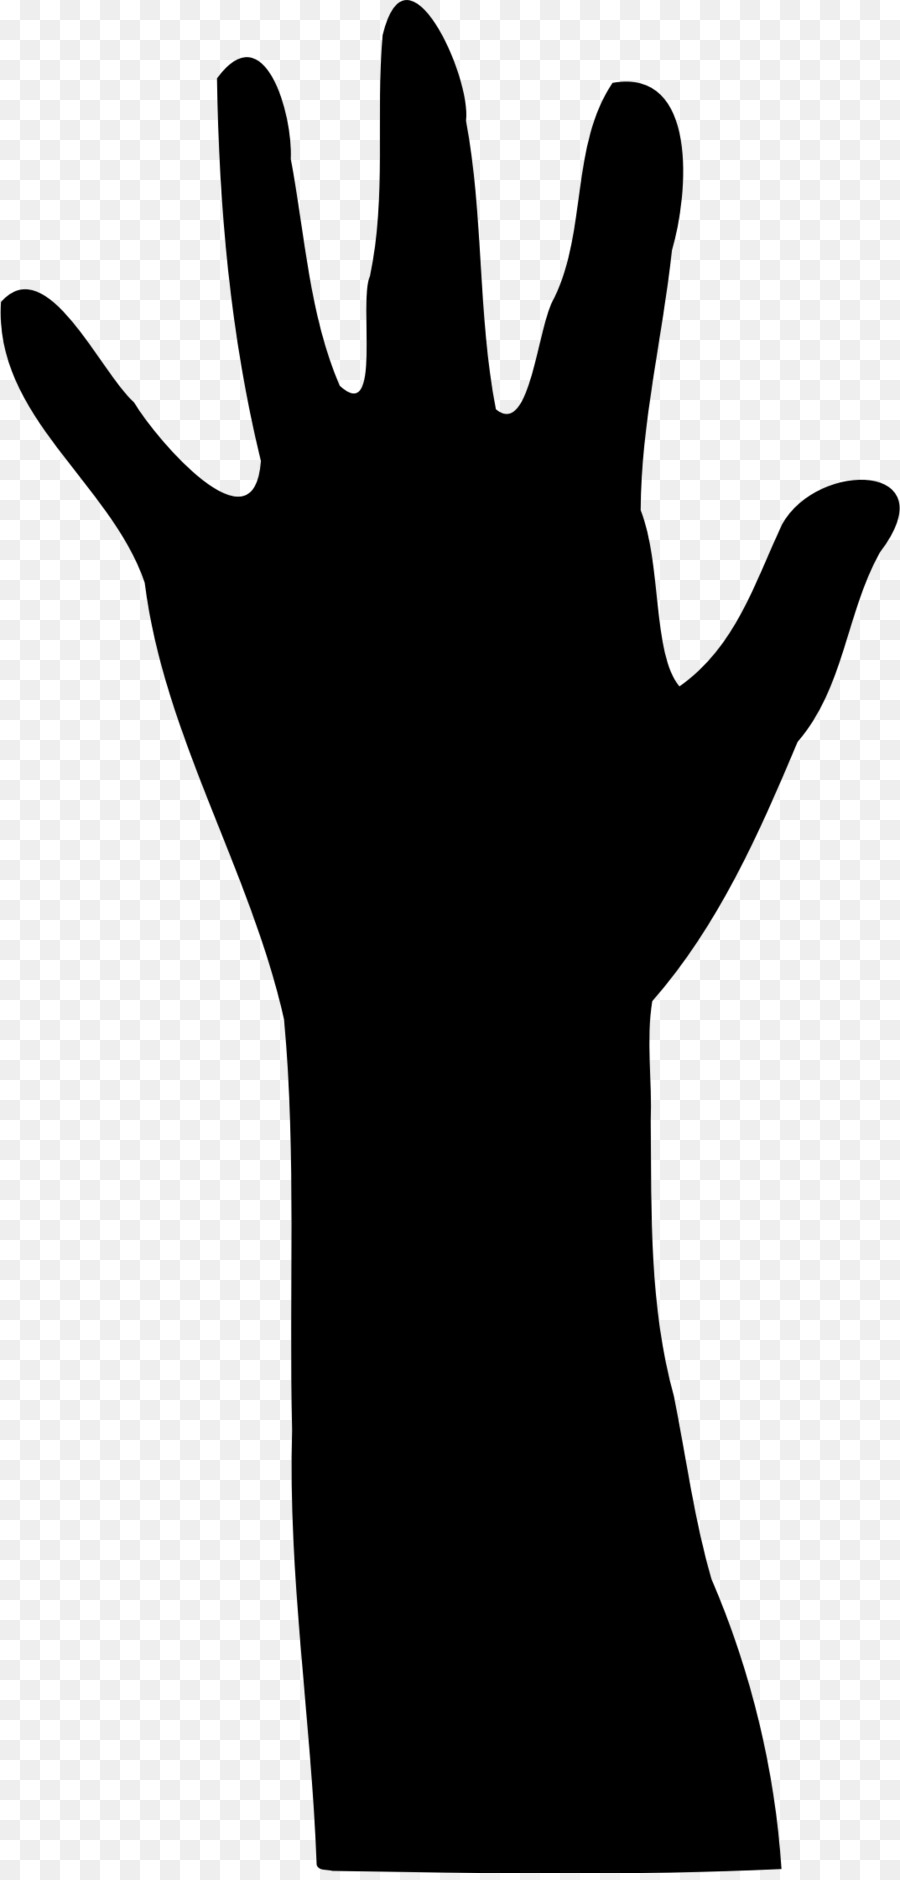 Silhouette Finger Line Clip art - crowd cheering png download - 1073*2233 - Free Transparent Silhouette png Download.